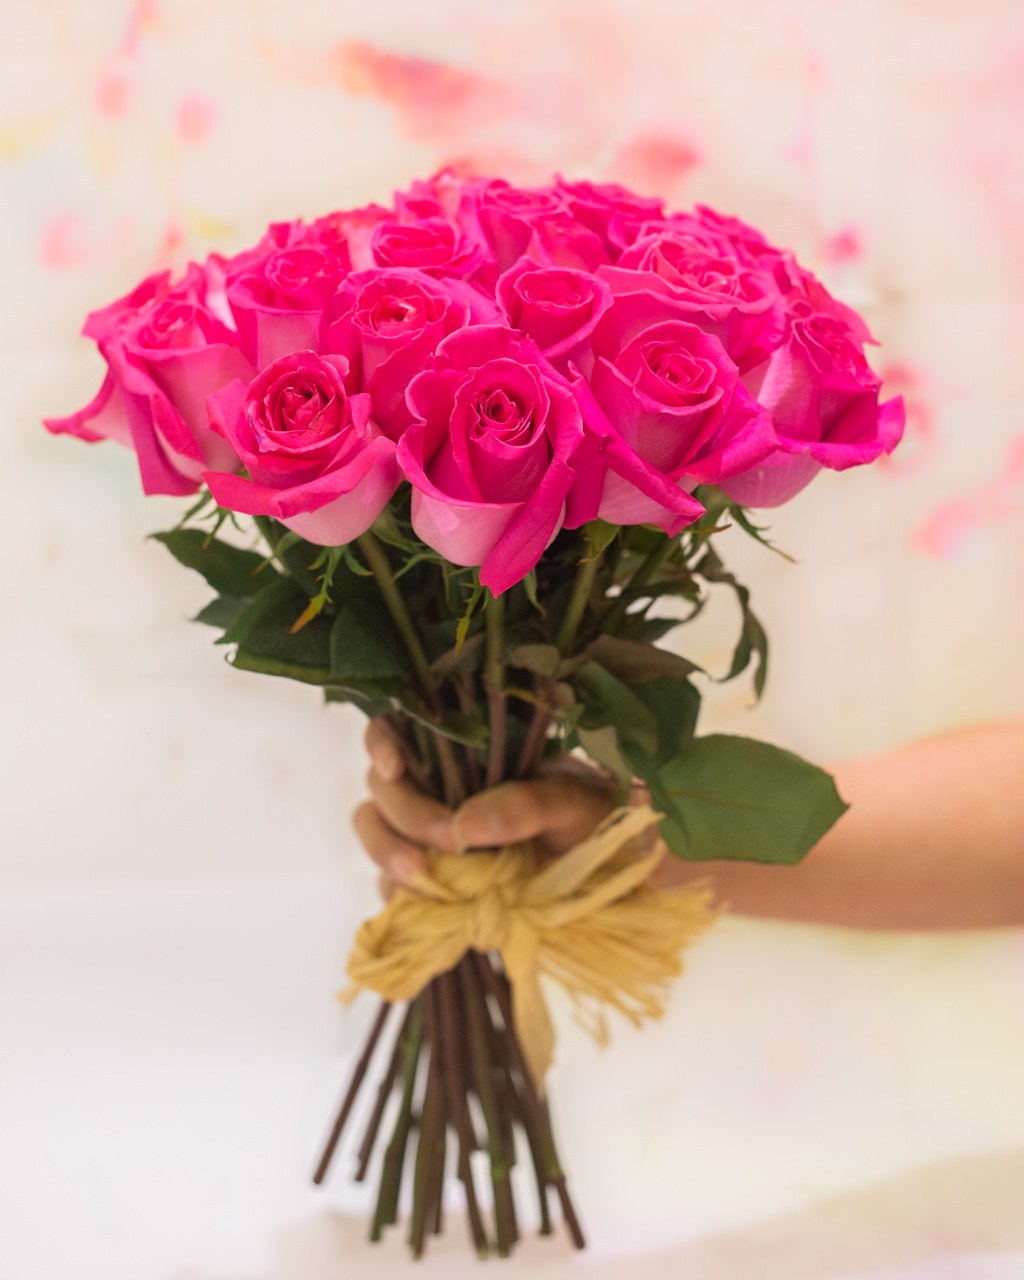 What Are the Different Types of Floral Arrangements?